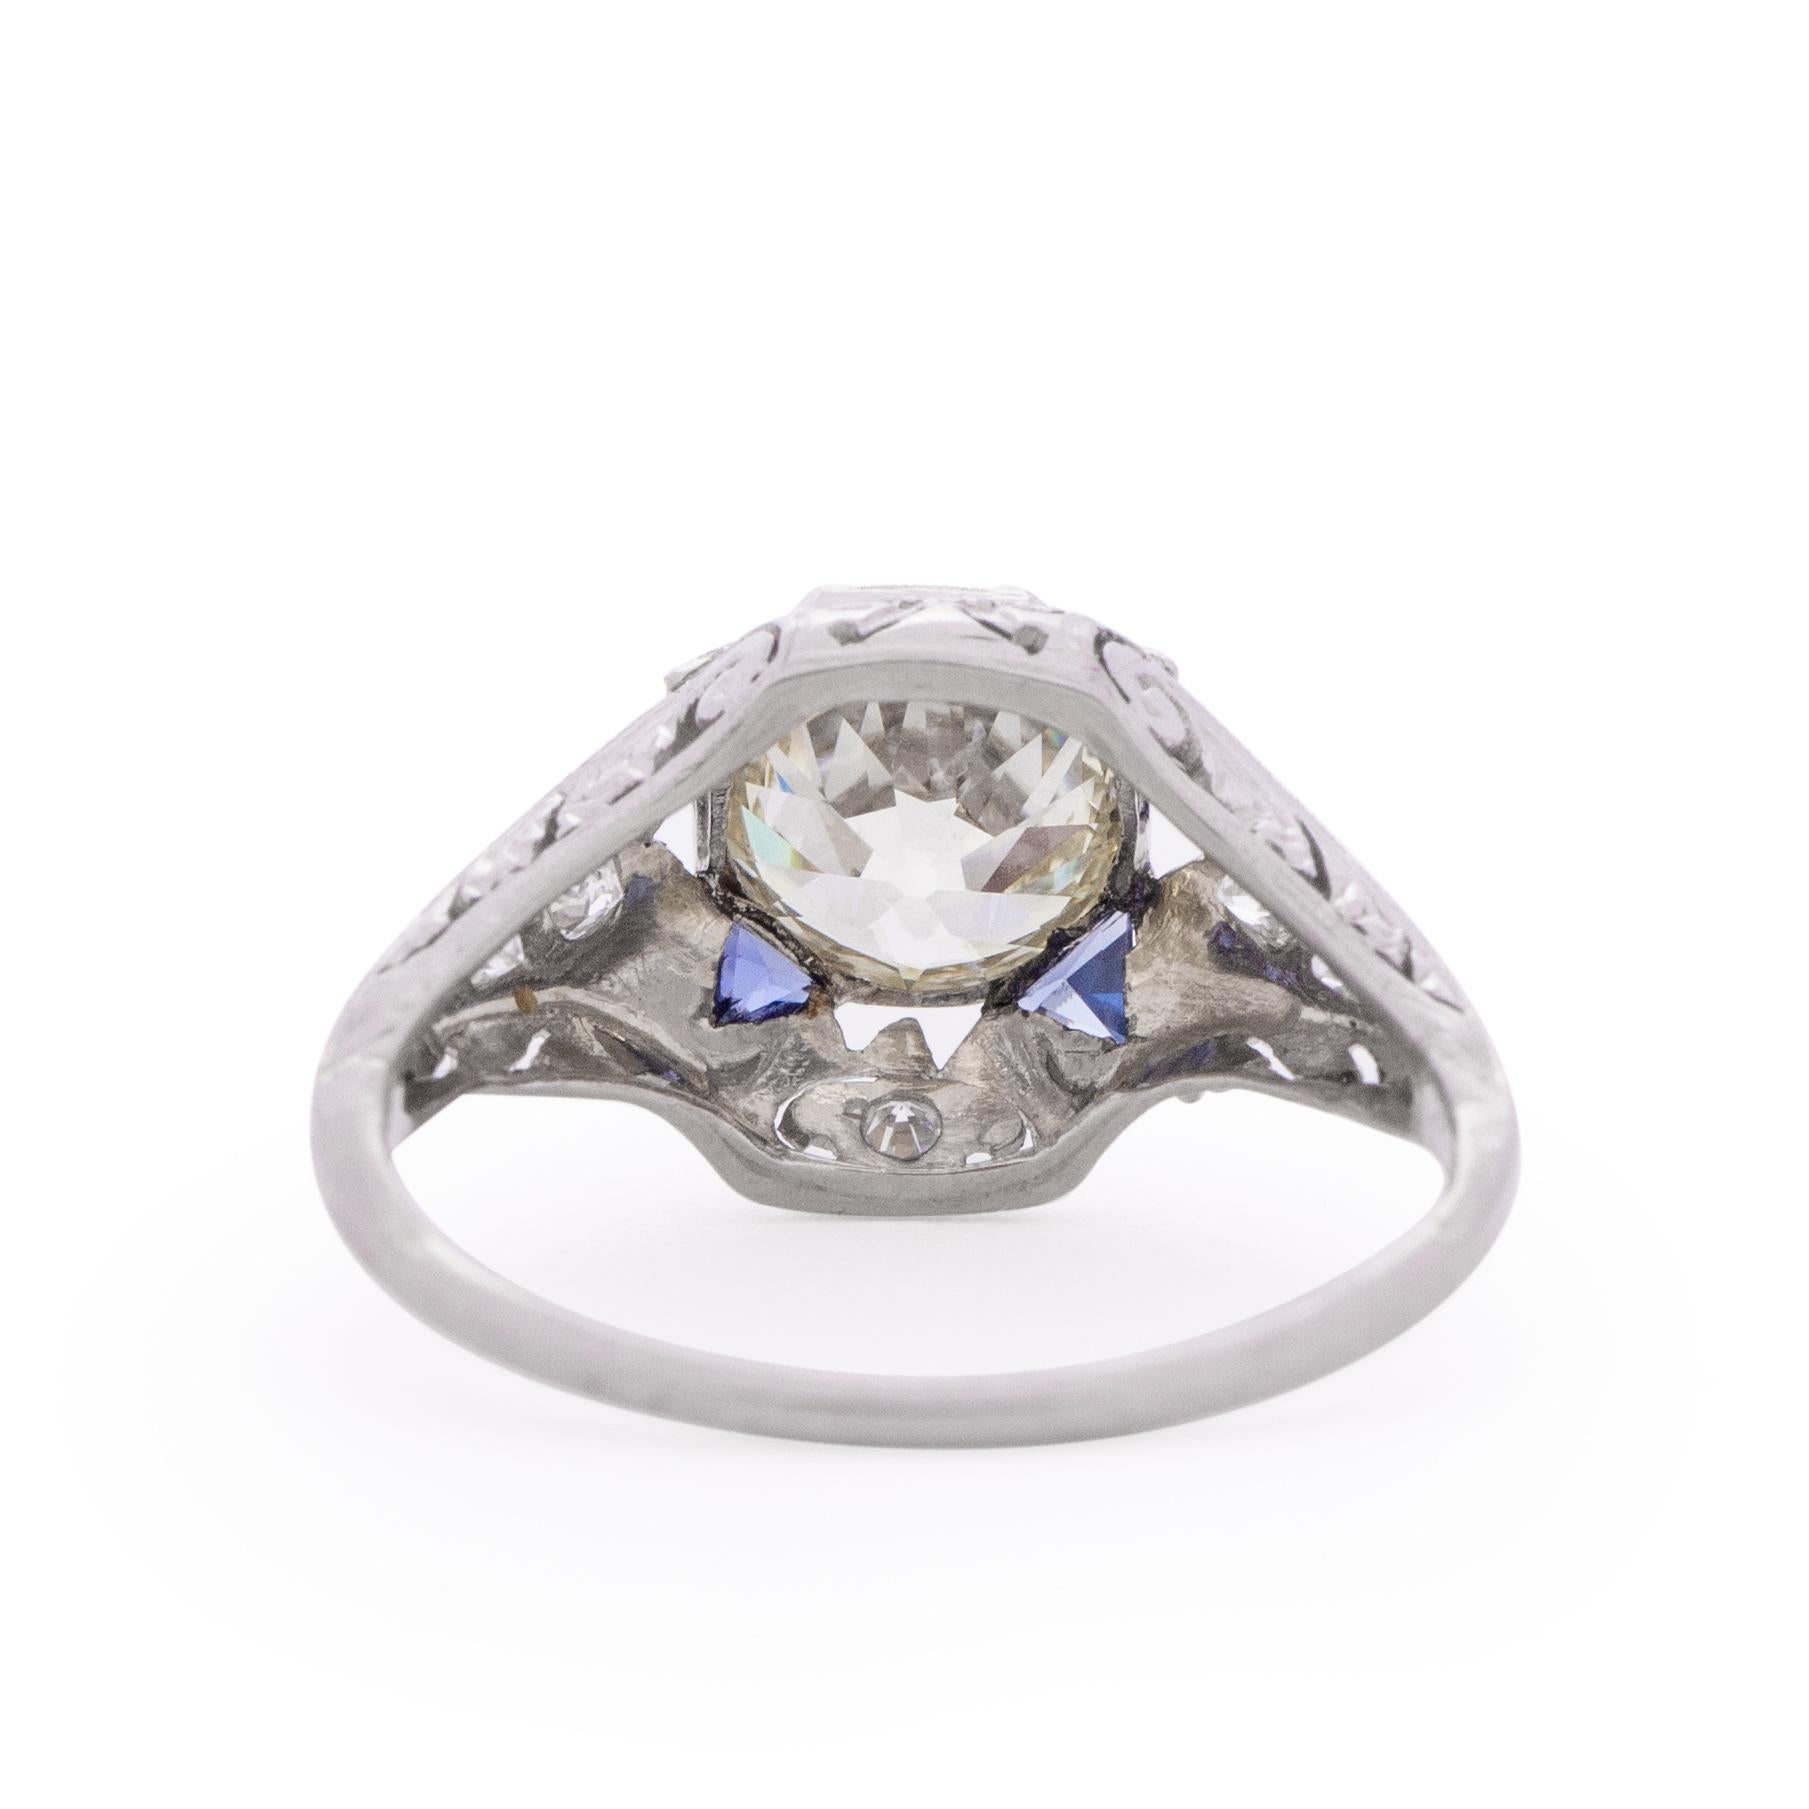 Art Deco Platinum Filigree Setting with 2.08 Ct Center Diamond, Accented with Sapphires